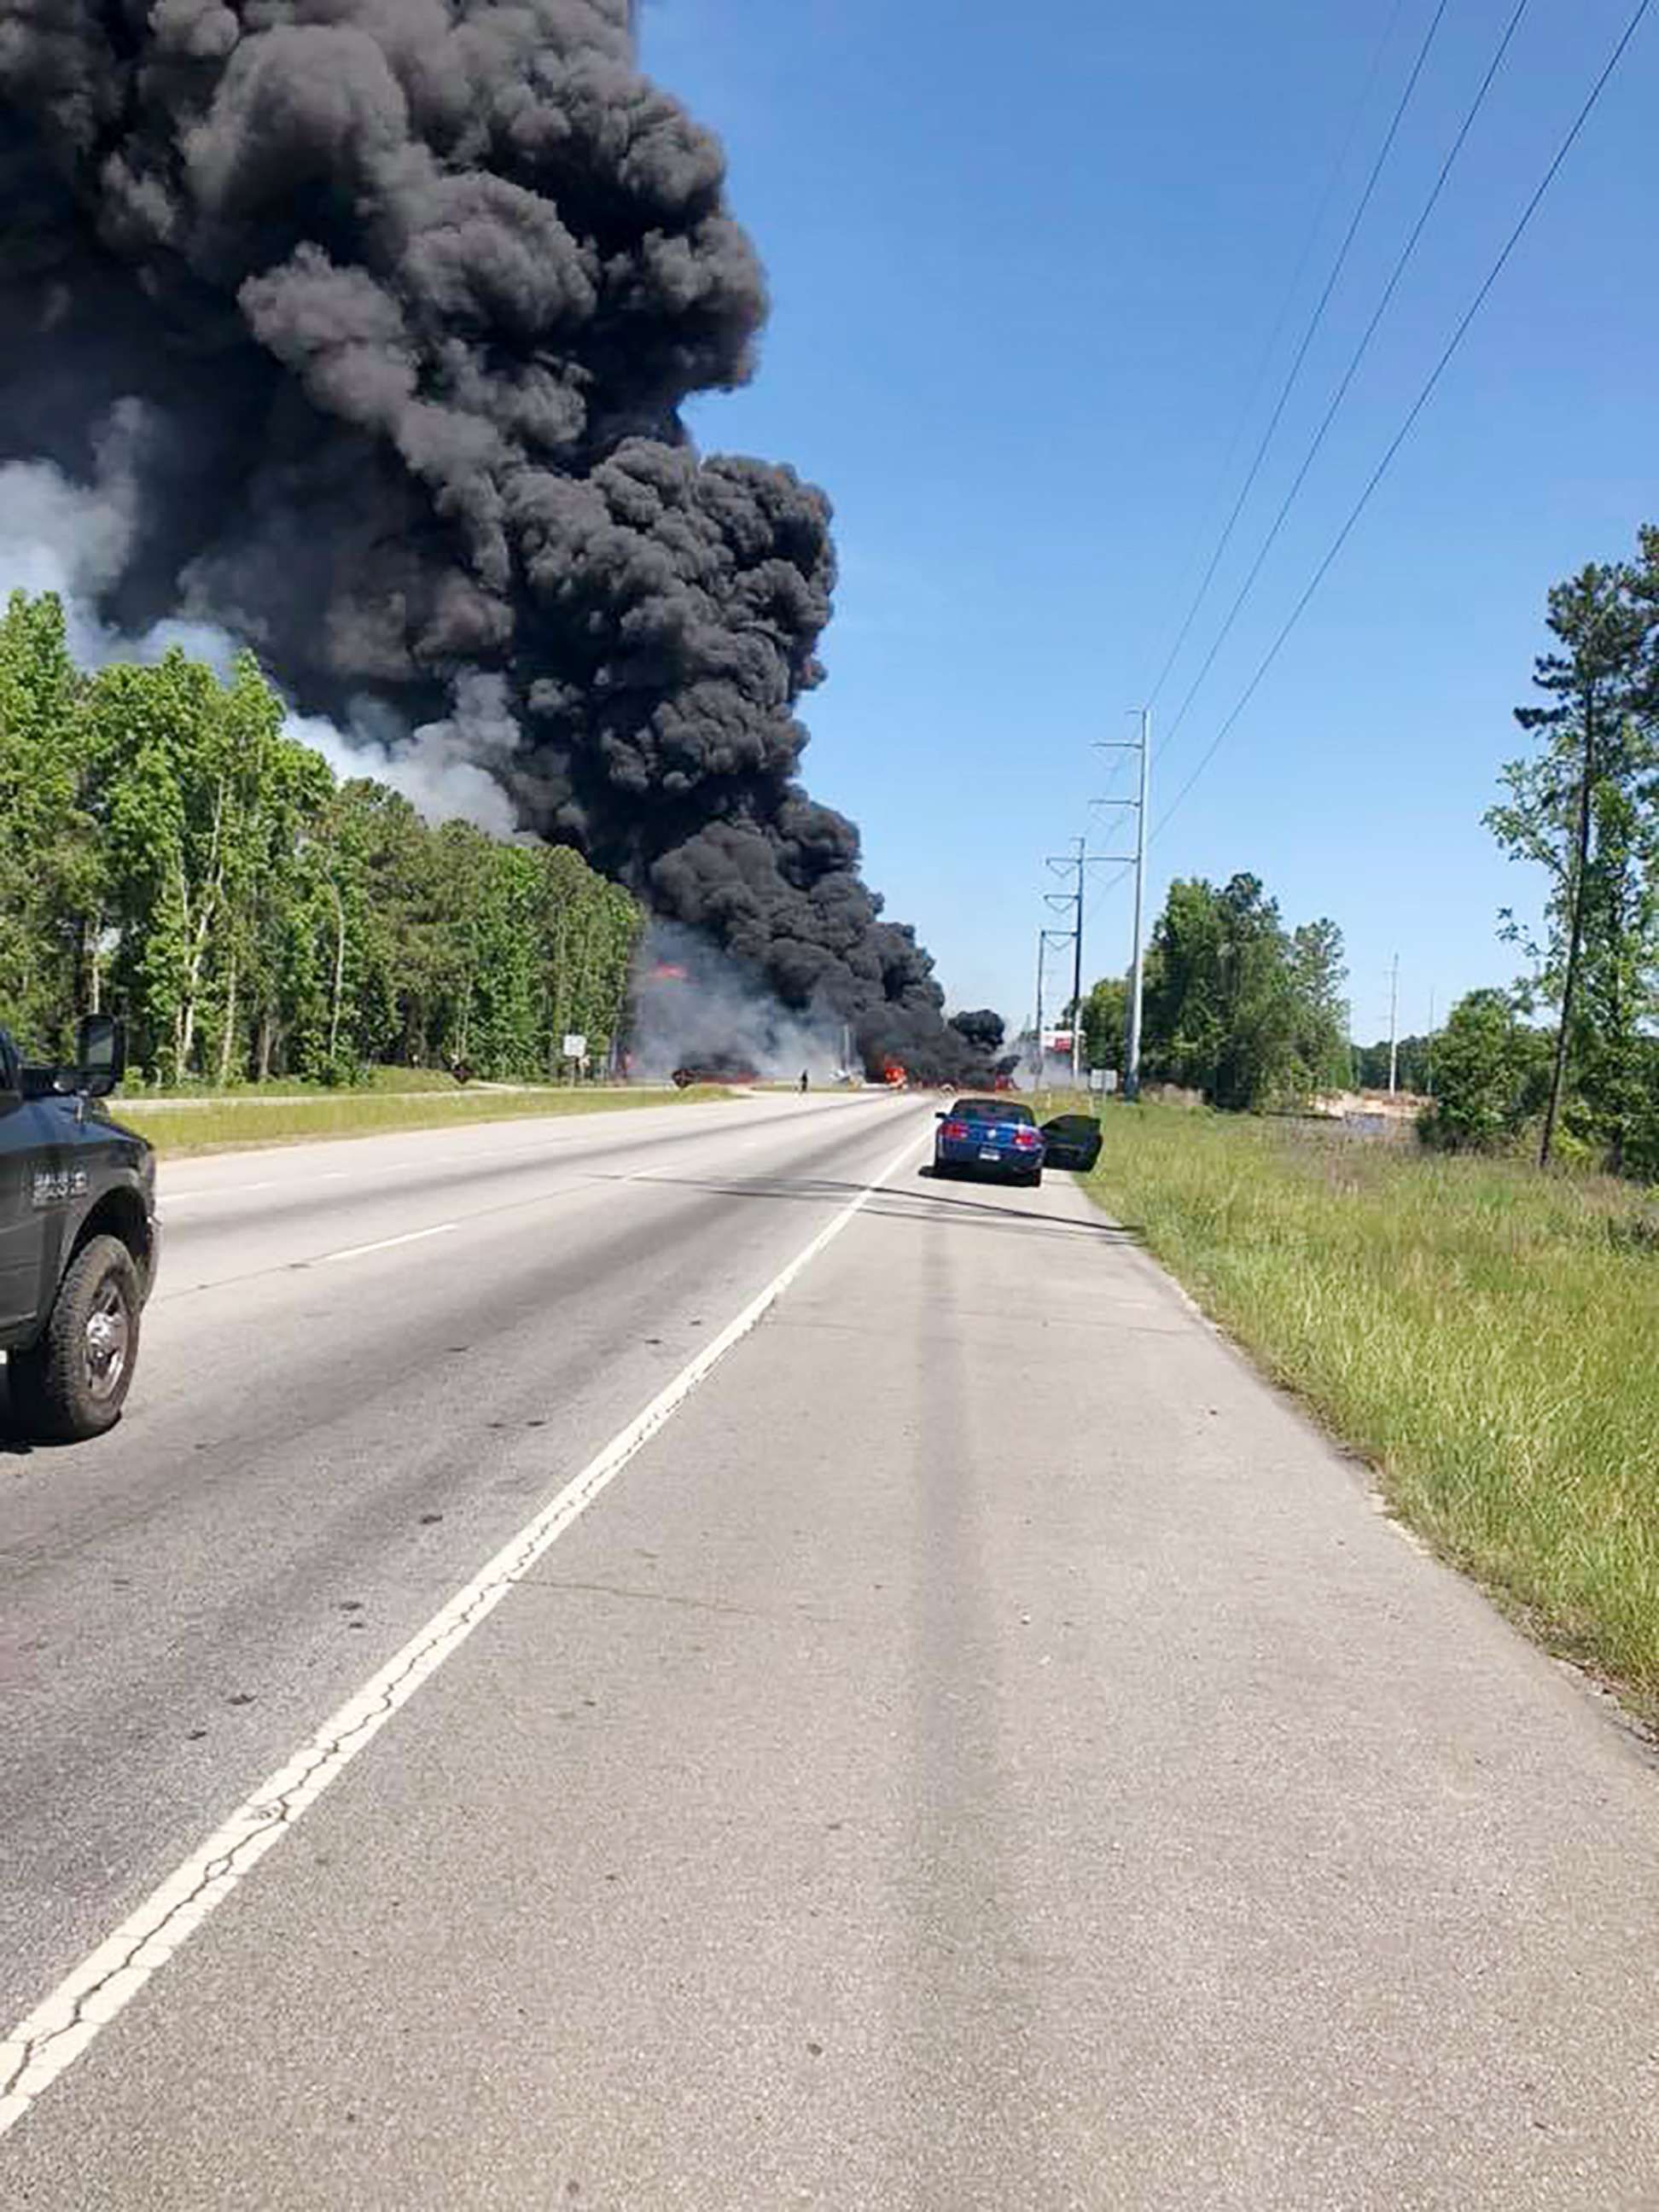 PHOTO: A C-130 military transport plane crashed near the airport in Savannah Ga. at the intersection of Highway 21 at Crossgate Road on May 2, 2018.  